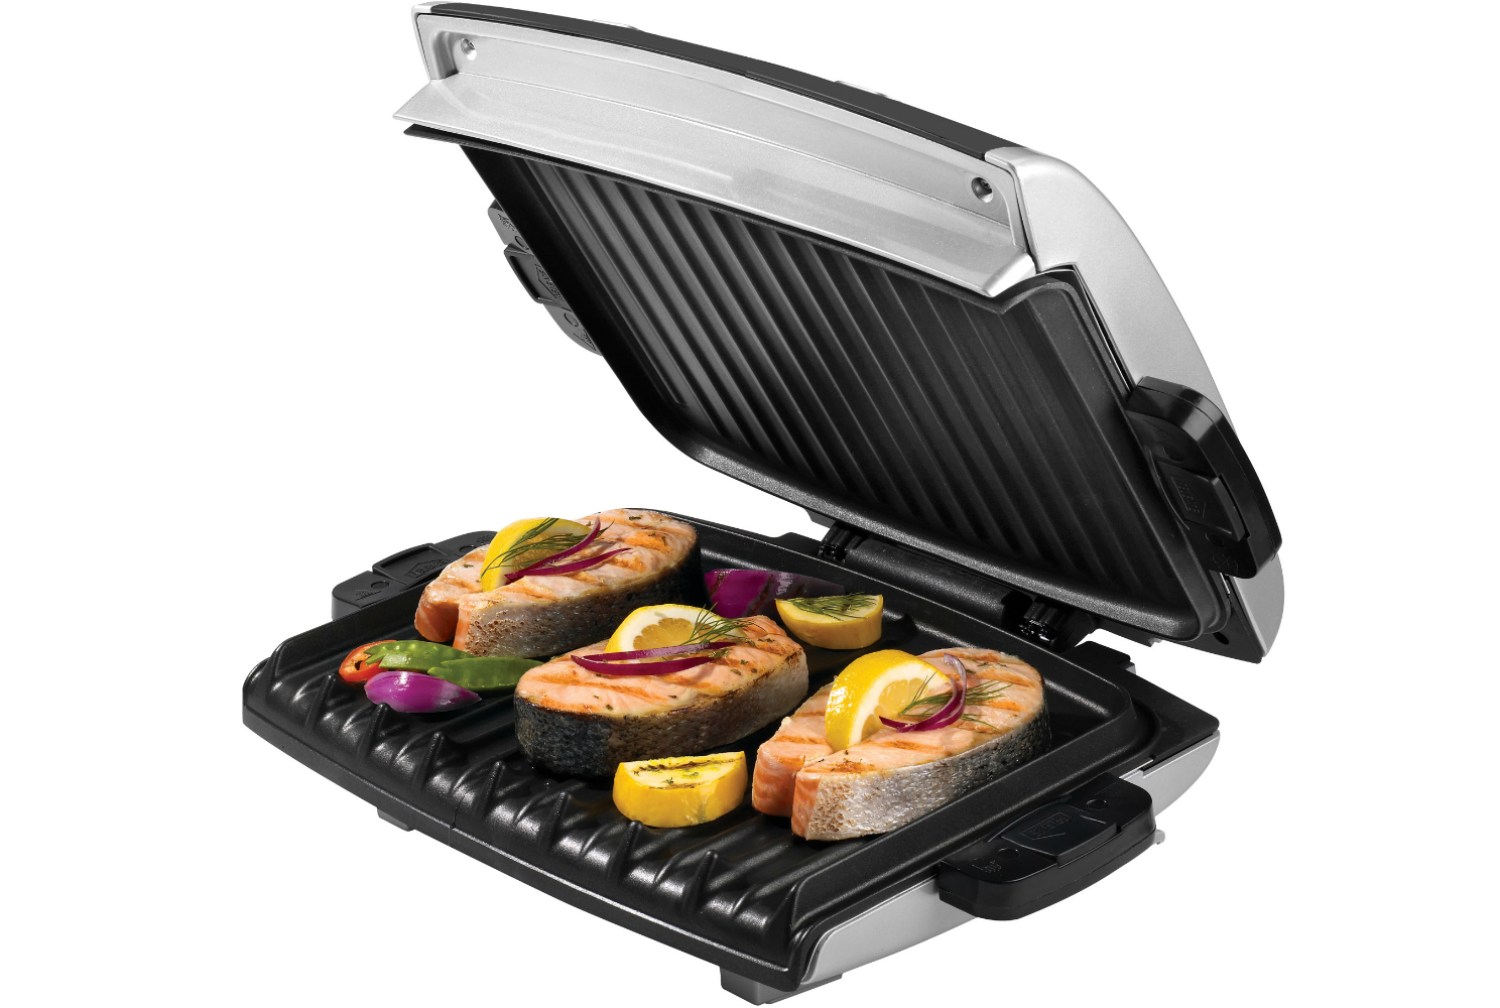 https://www.digitaltrends.com/wp-content/uploads/2019/05/george-foreman-6-serving-removable-plate-electric-grill-and-panini-press-2.jpg?resize=1500%2C1008&p=1